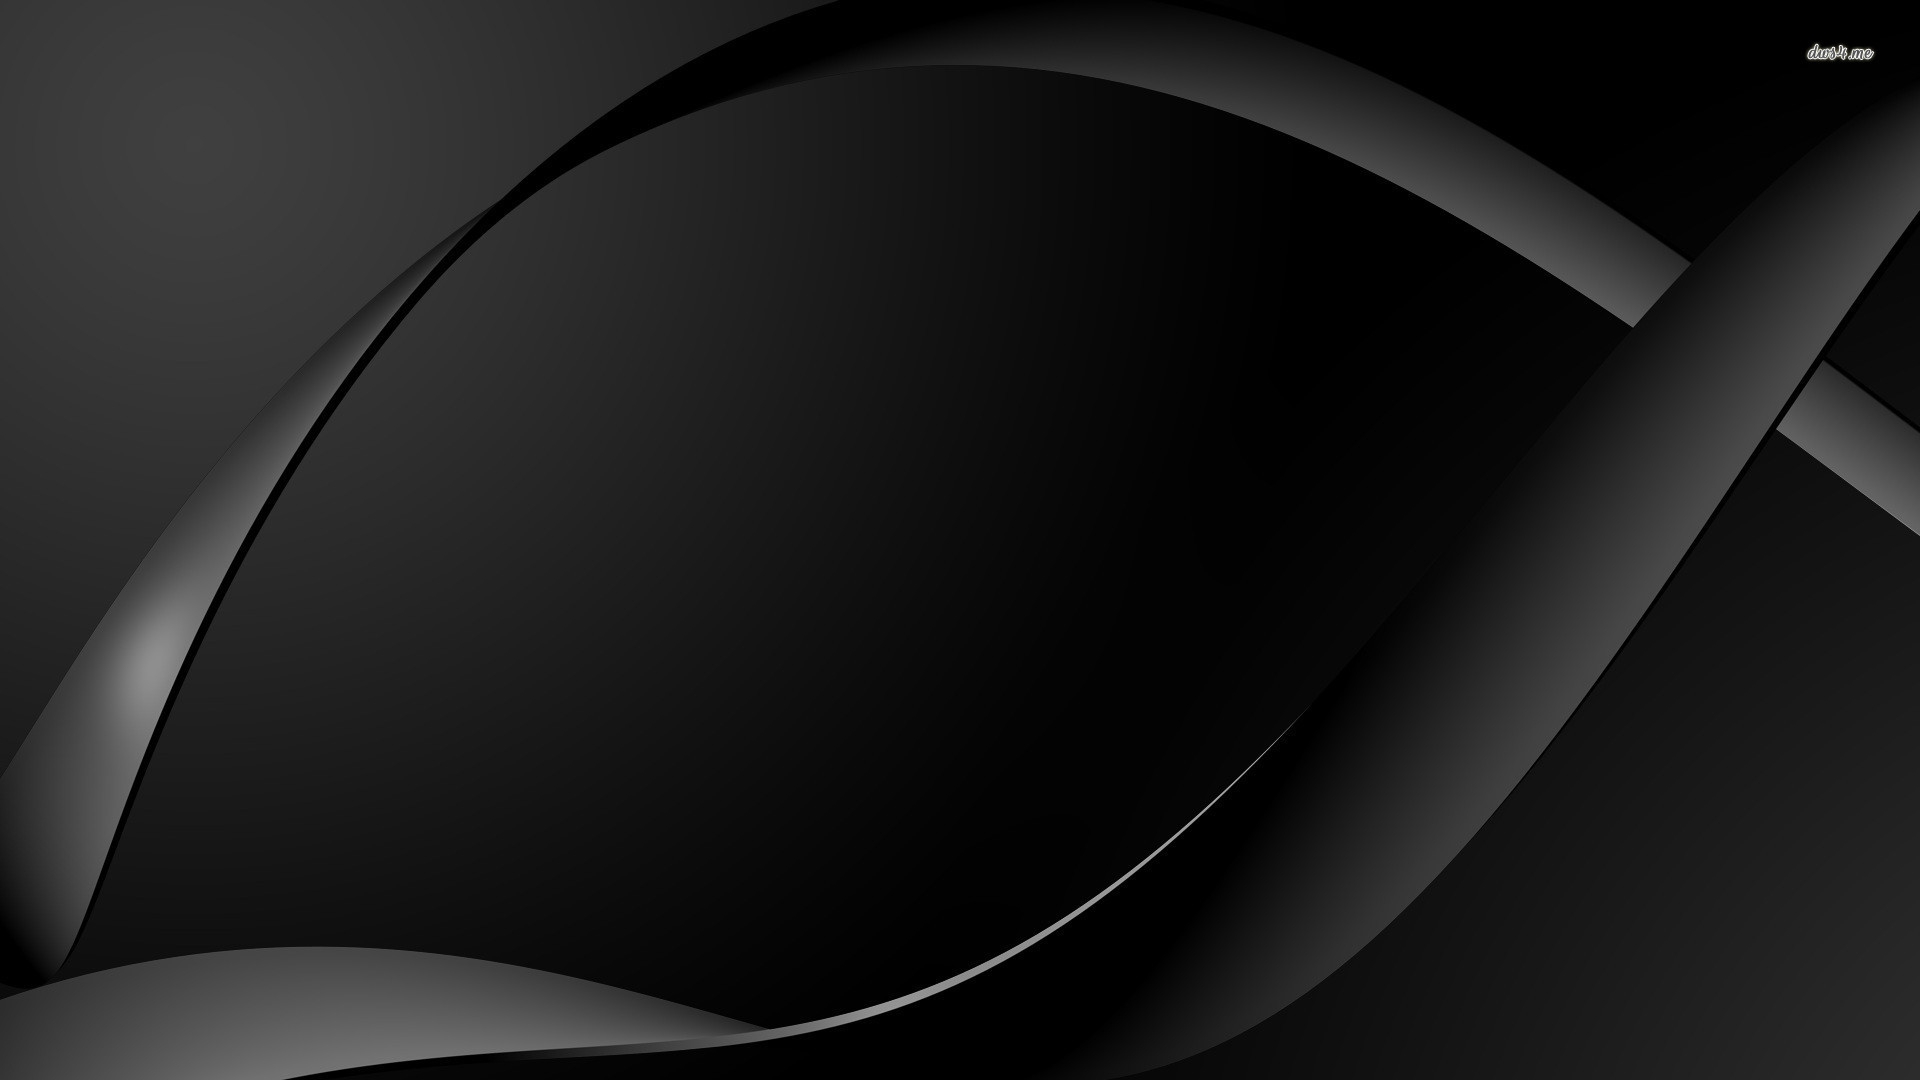 Black curves wallpaper - Abstract wallpapers - #10420